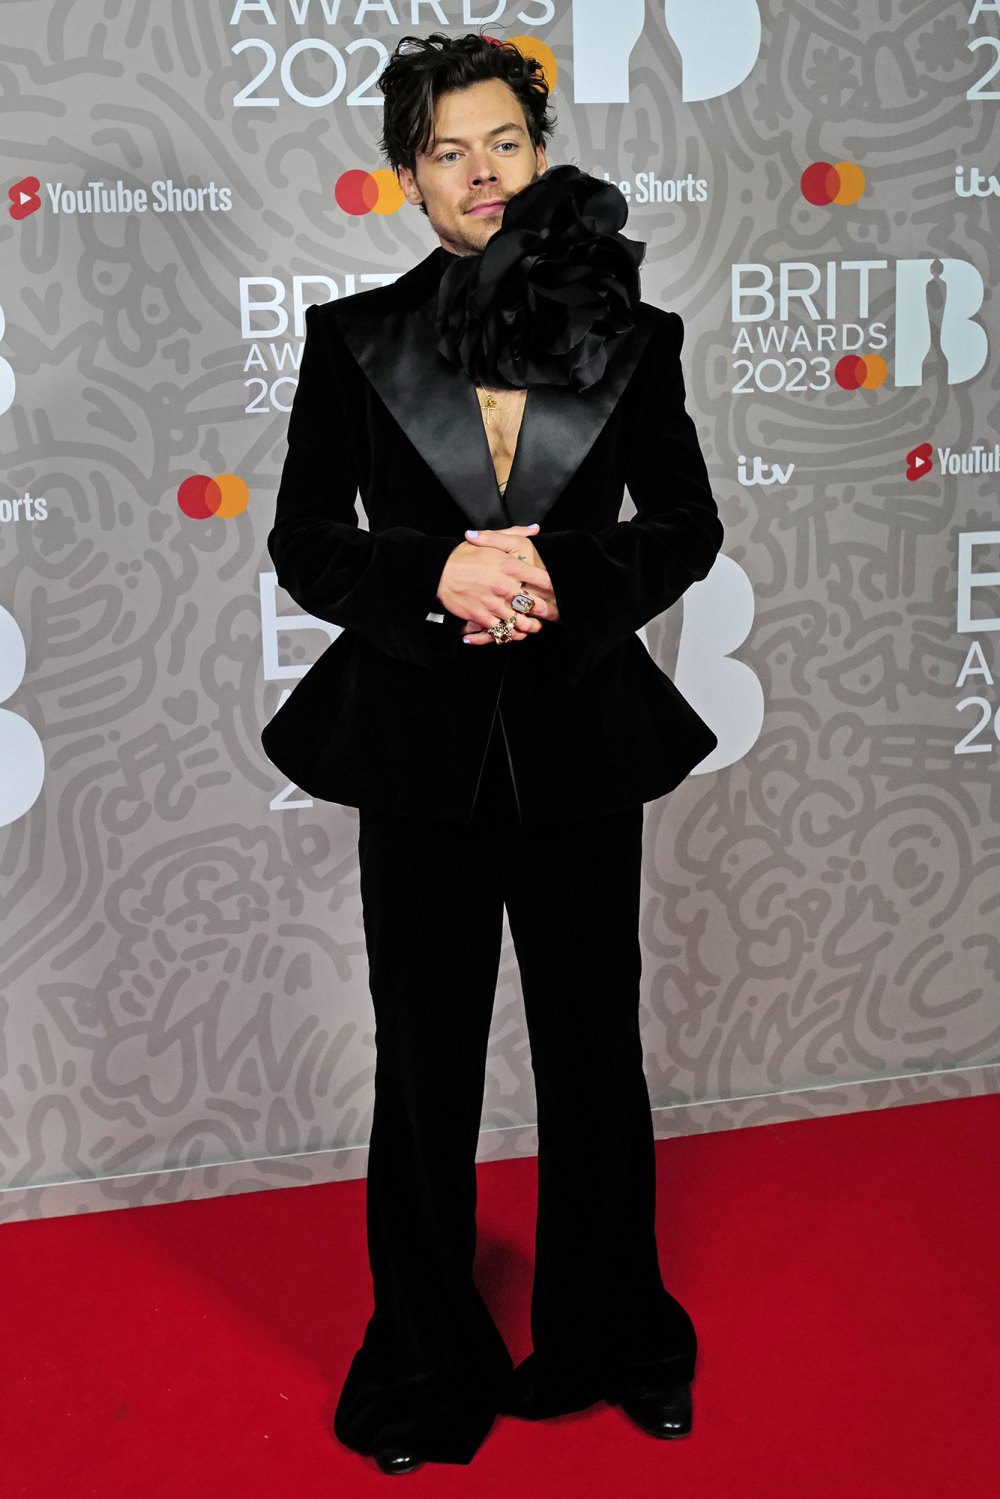 Harry Styles Wears Giant Flower Choker on 2023 Brit Awards Red Carpet: See Photos